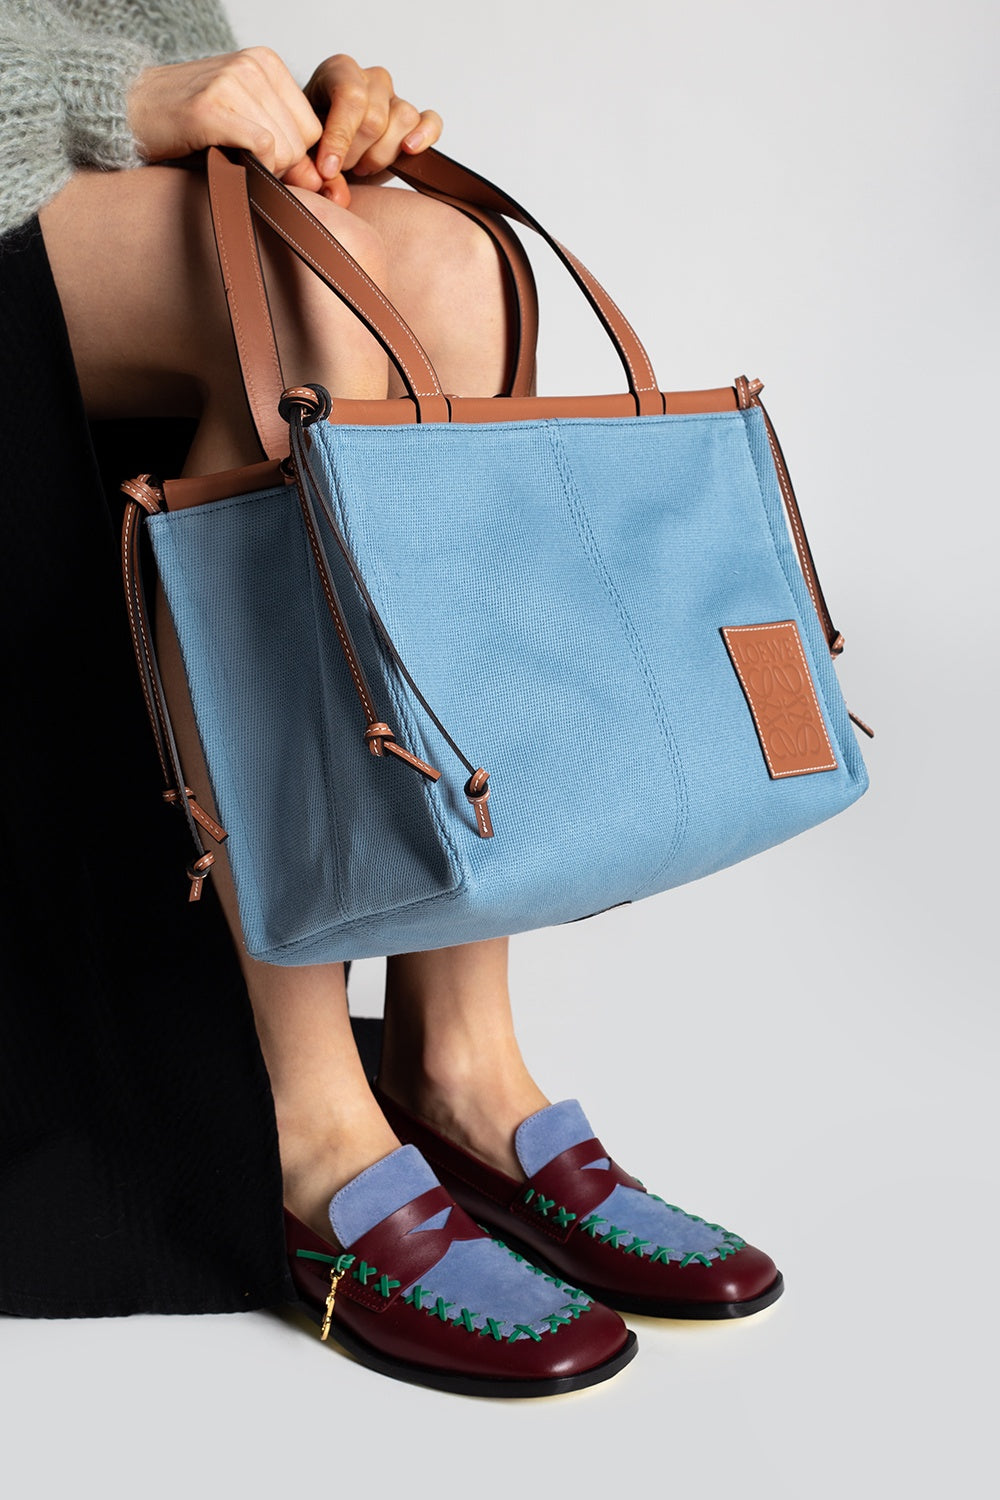 LOEWE  Blue canvas and leather tote bag